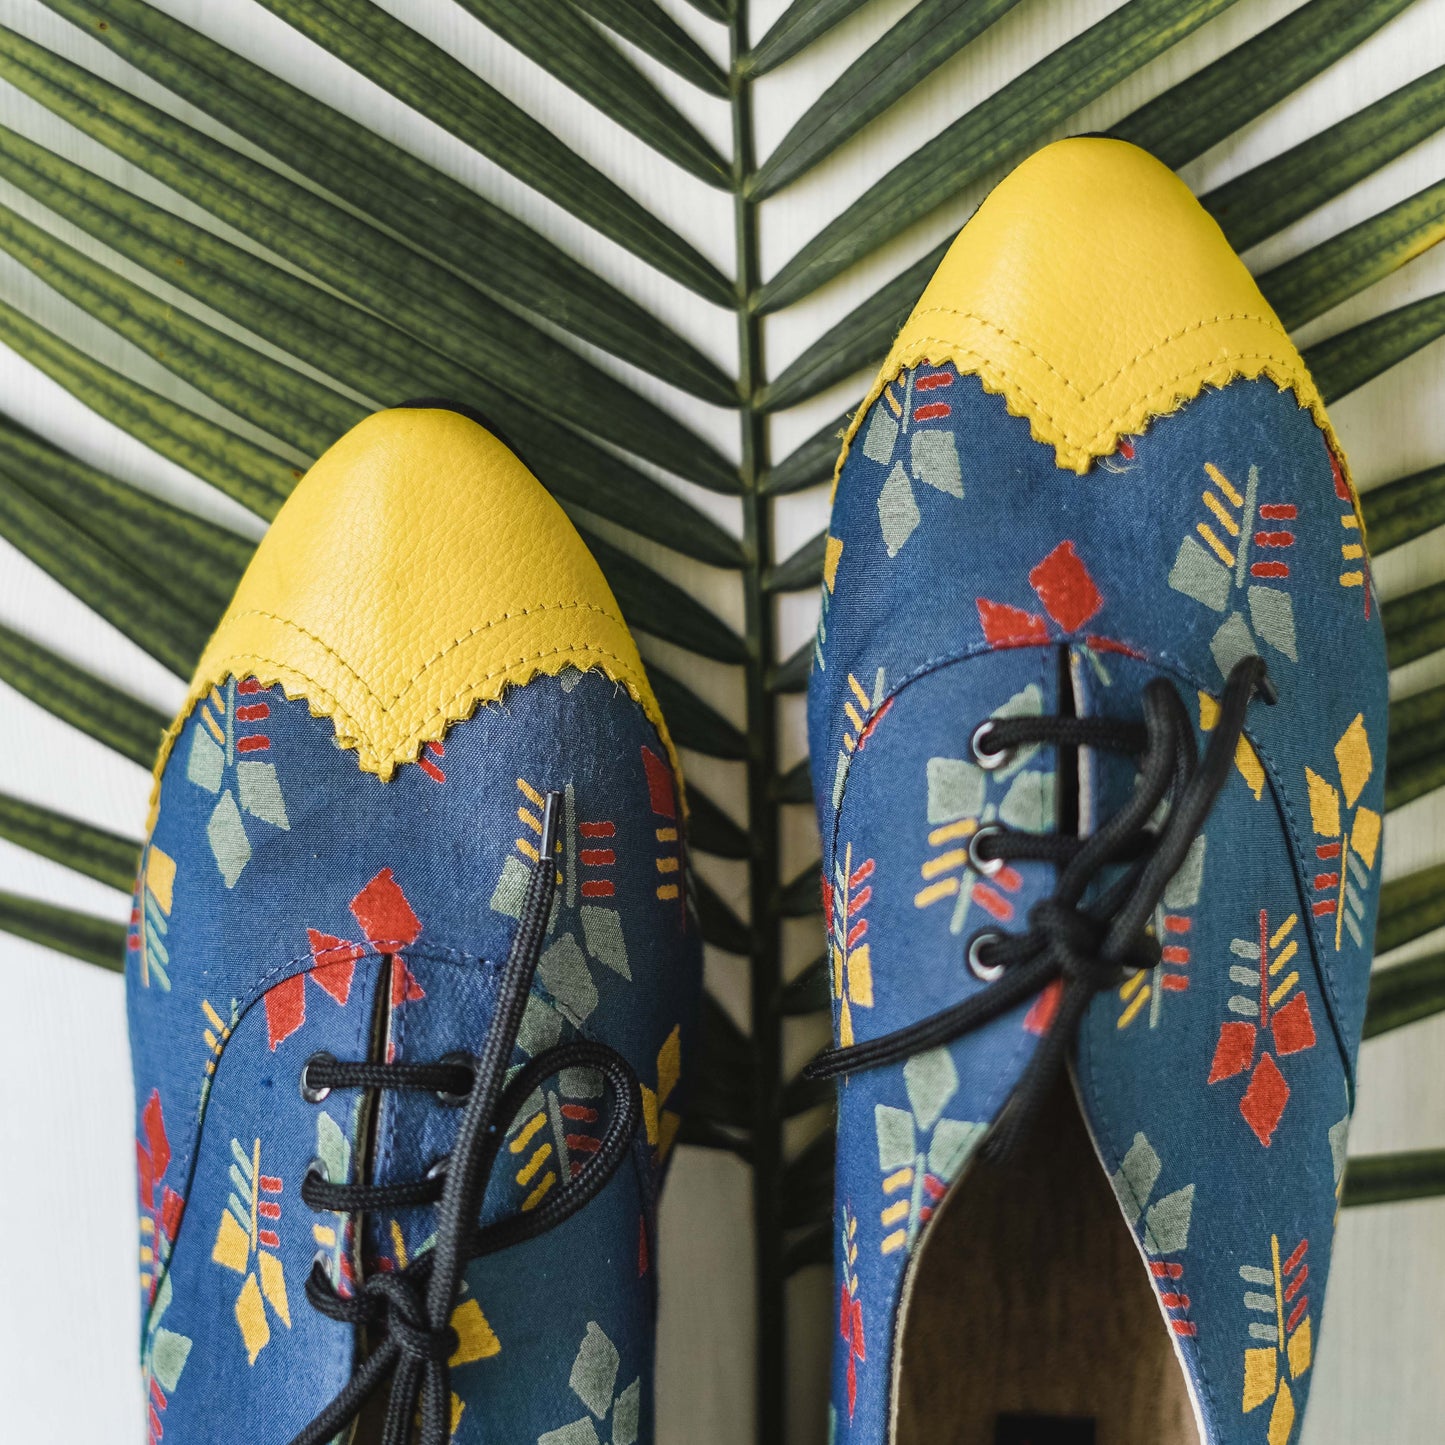 Dual Textured Printed Oxfords